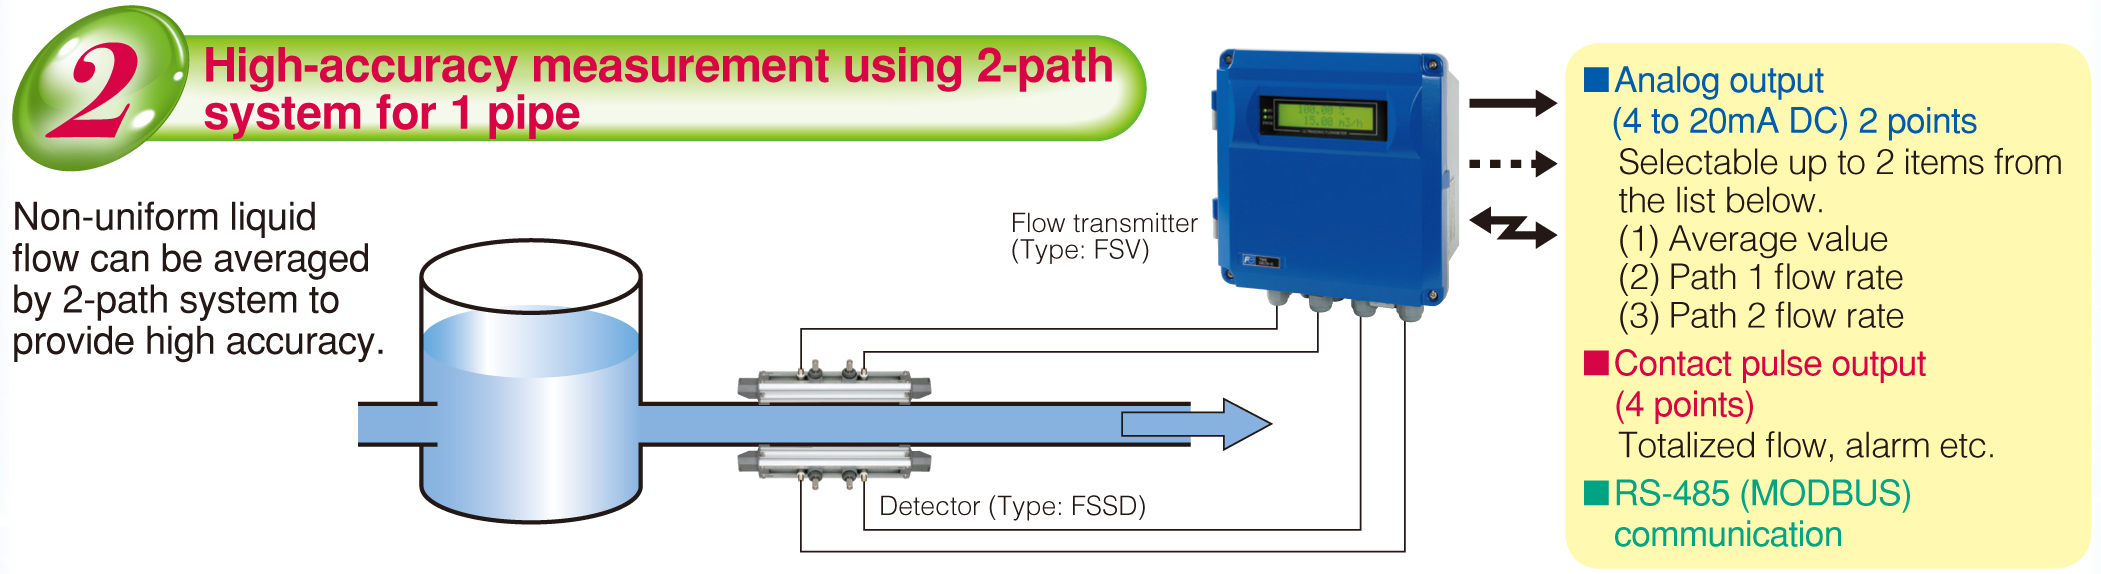 High accuracy measurement by 2-path system for 1 pipe